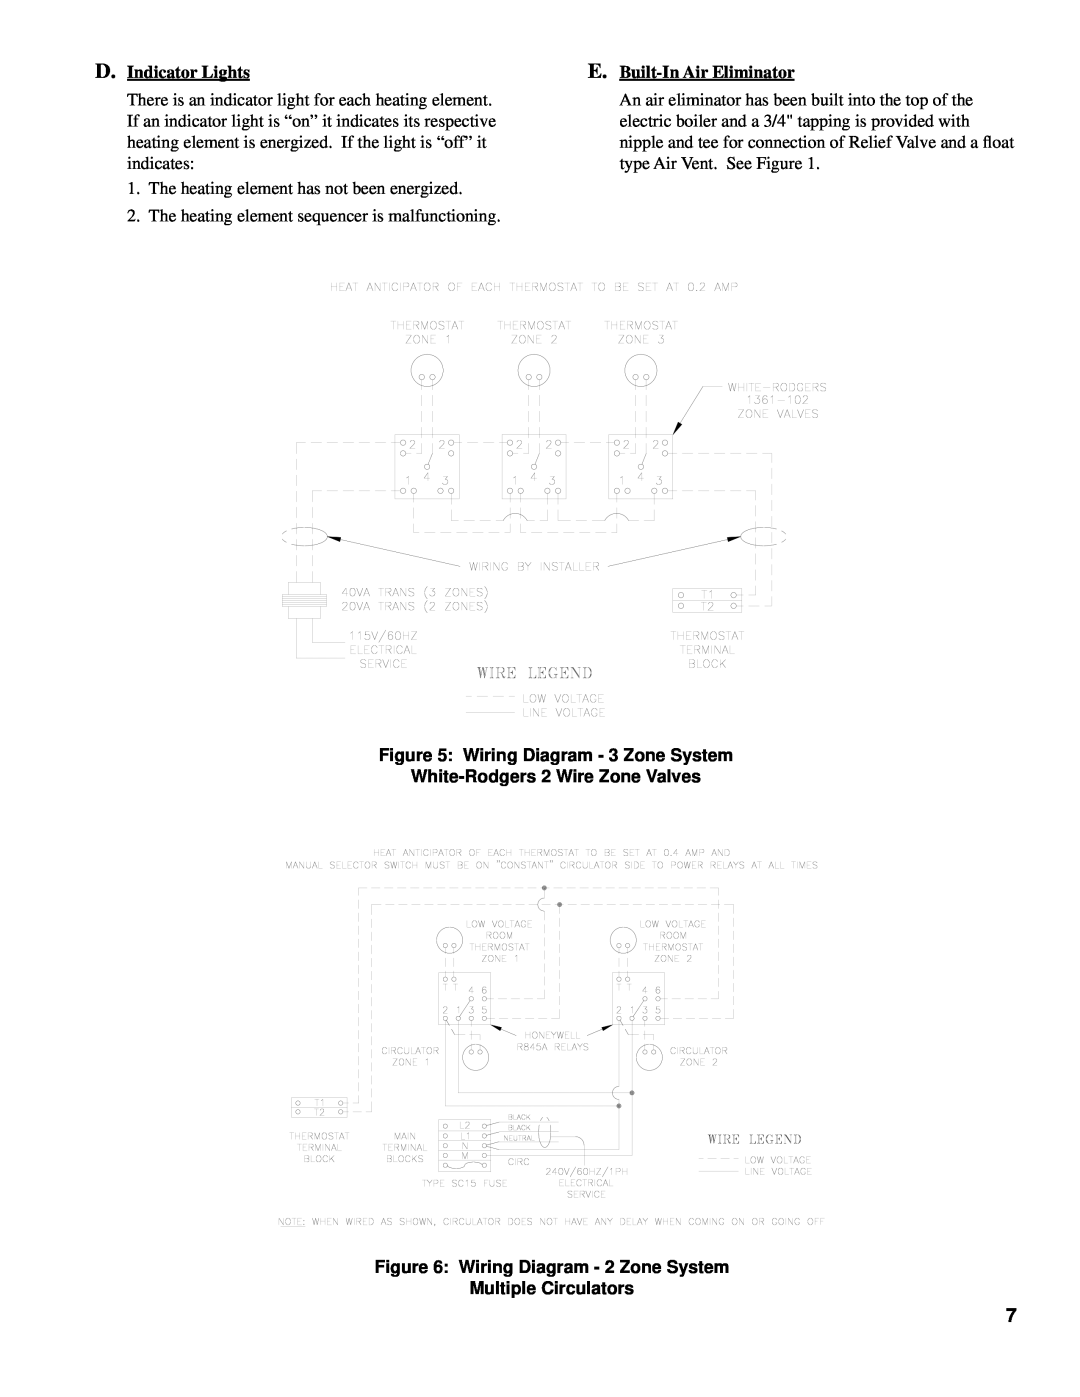 Burnham E4 manual Wiring Diagram - 3 Zone System, White-Rodgers 2 Wire Zone Valves, D. Indicator Lights 